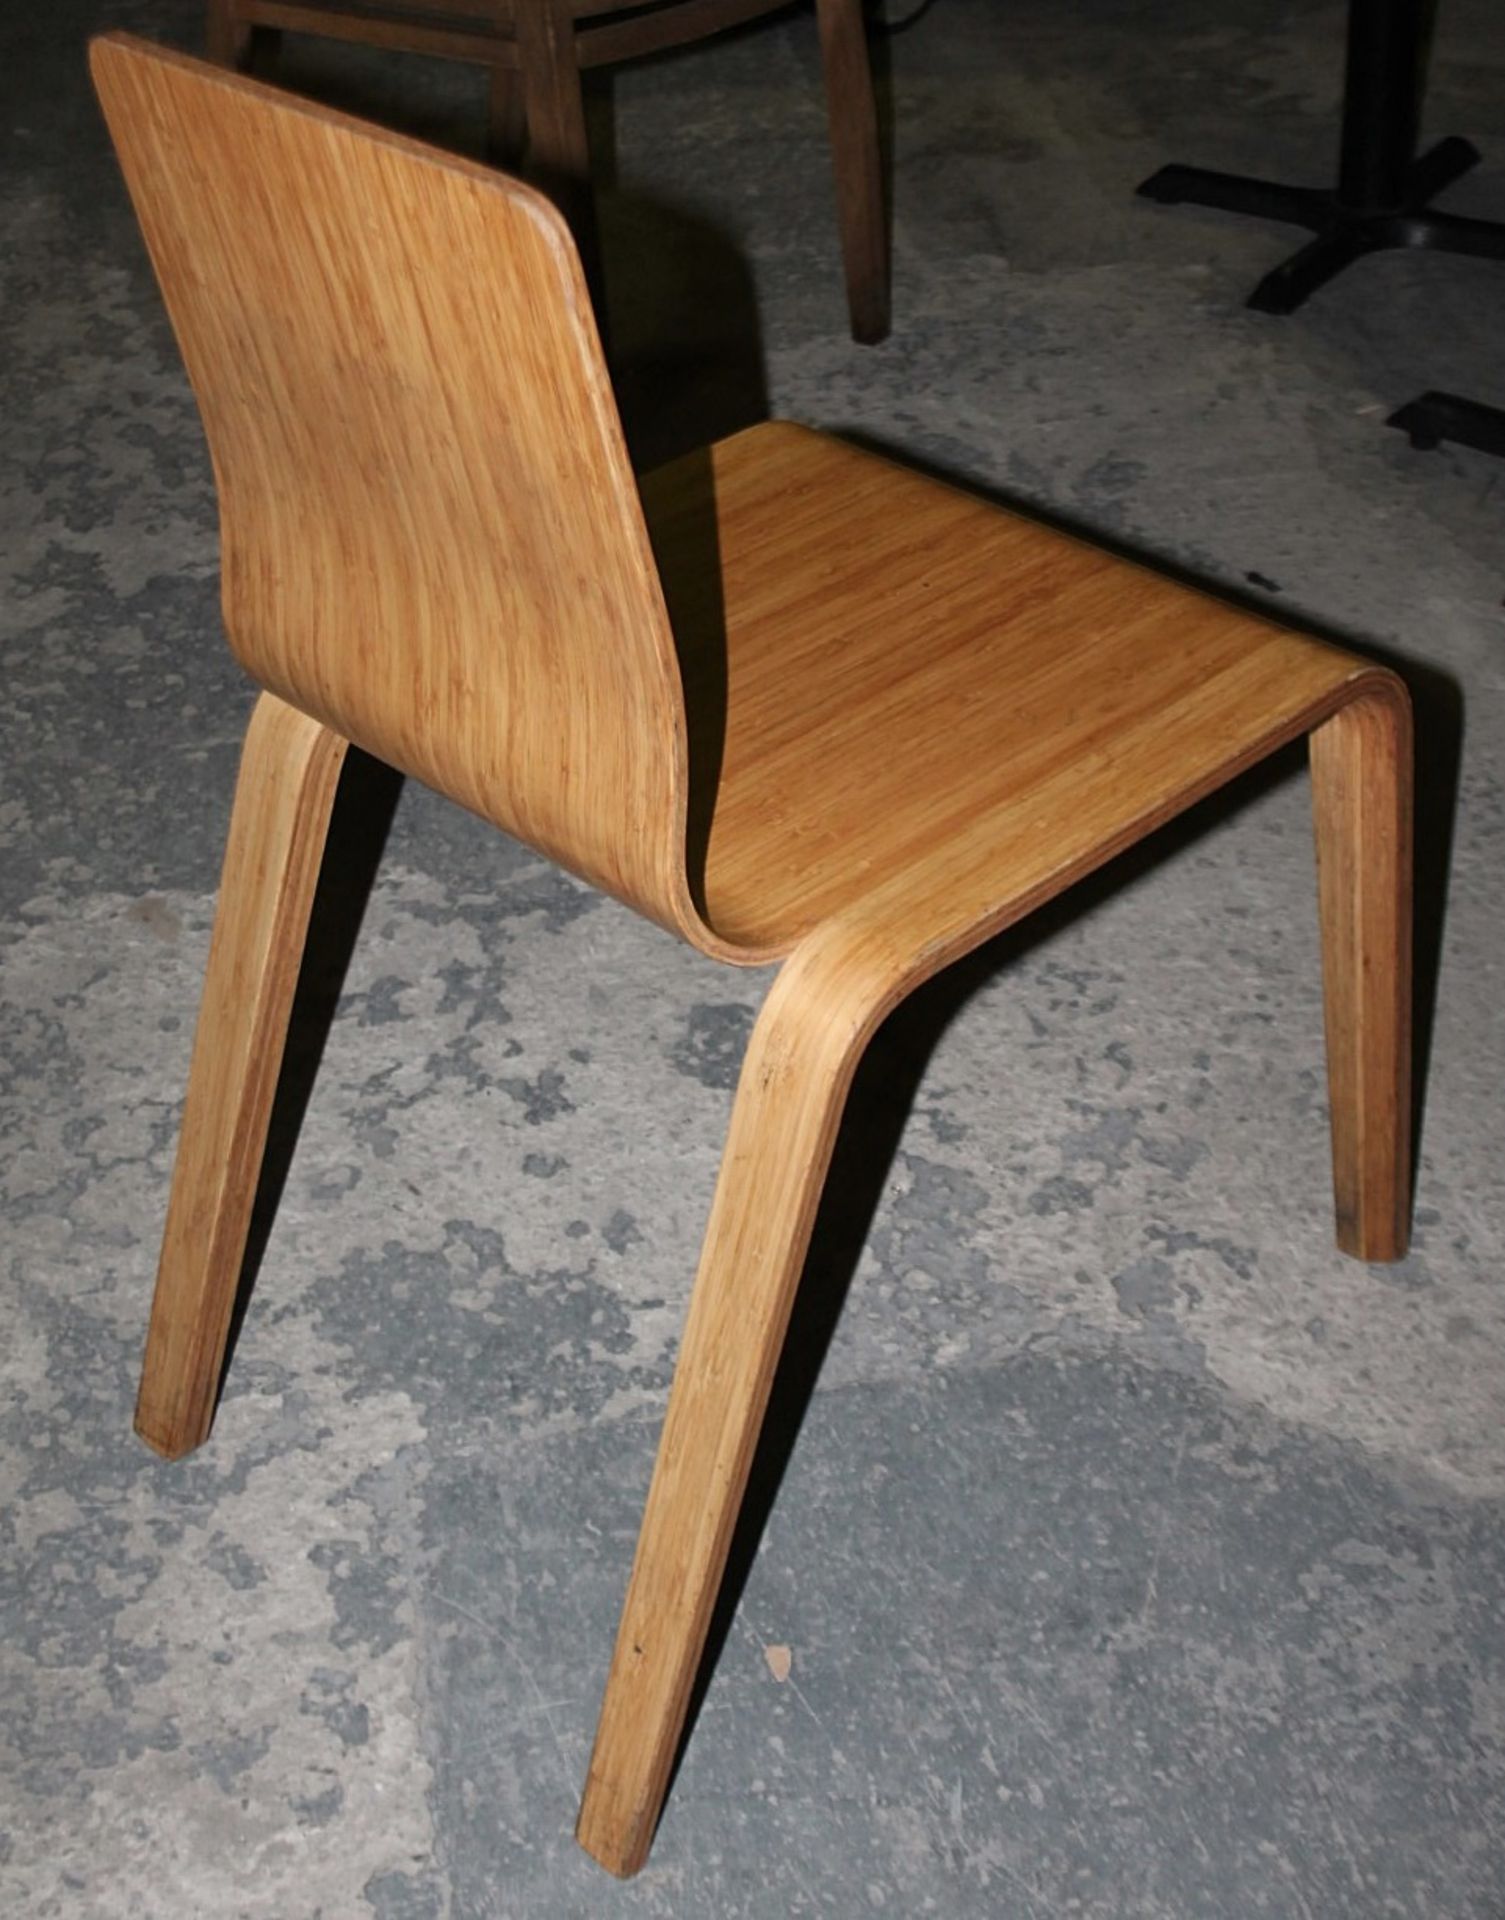 1 x Stylish Wooden Chair With A Curved Design - Dimensions: H80 x W42 x D58cm / Seat 44cm - Ref: - Image 2 of 4